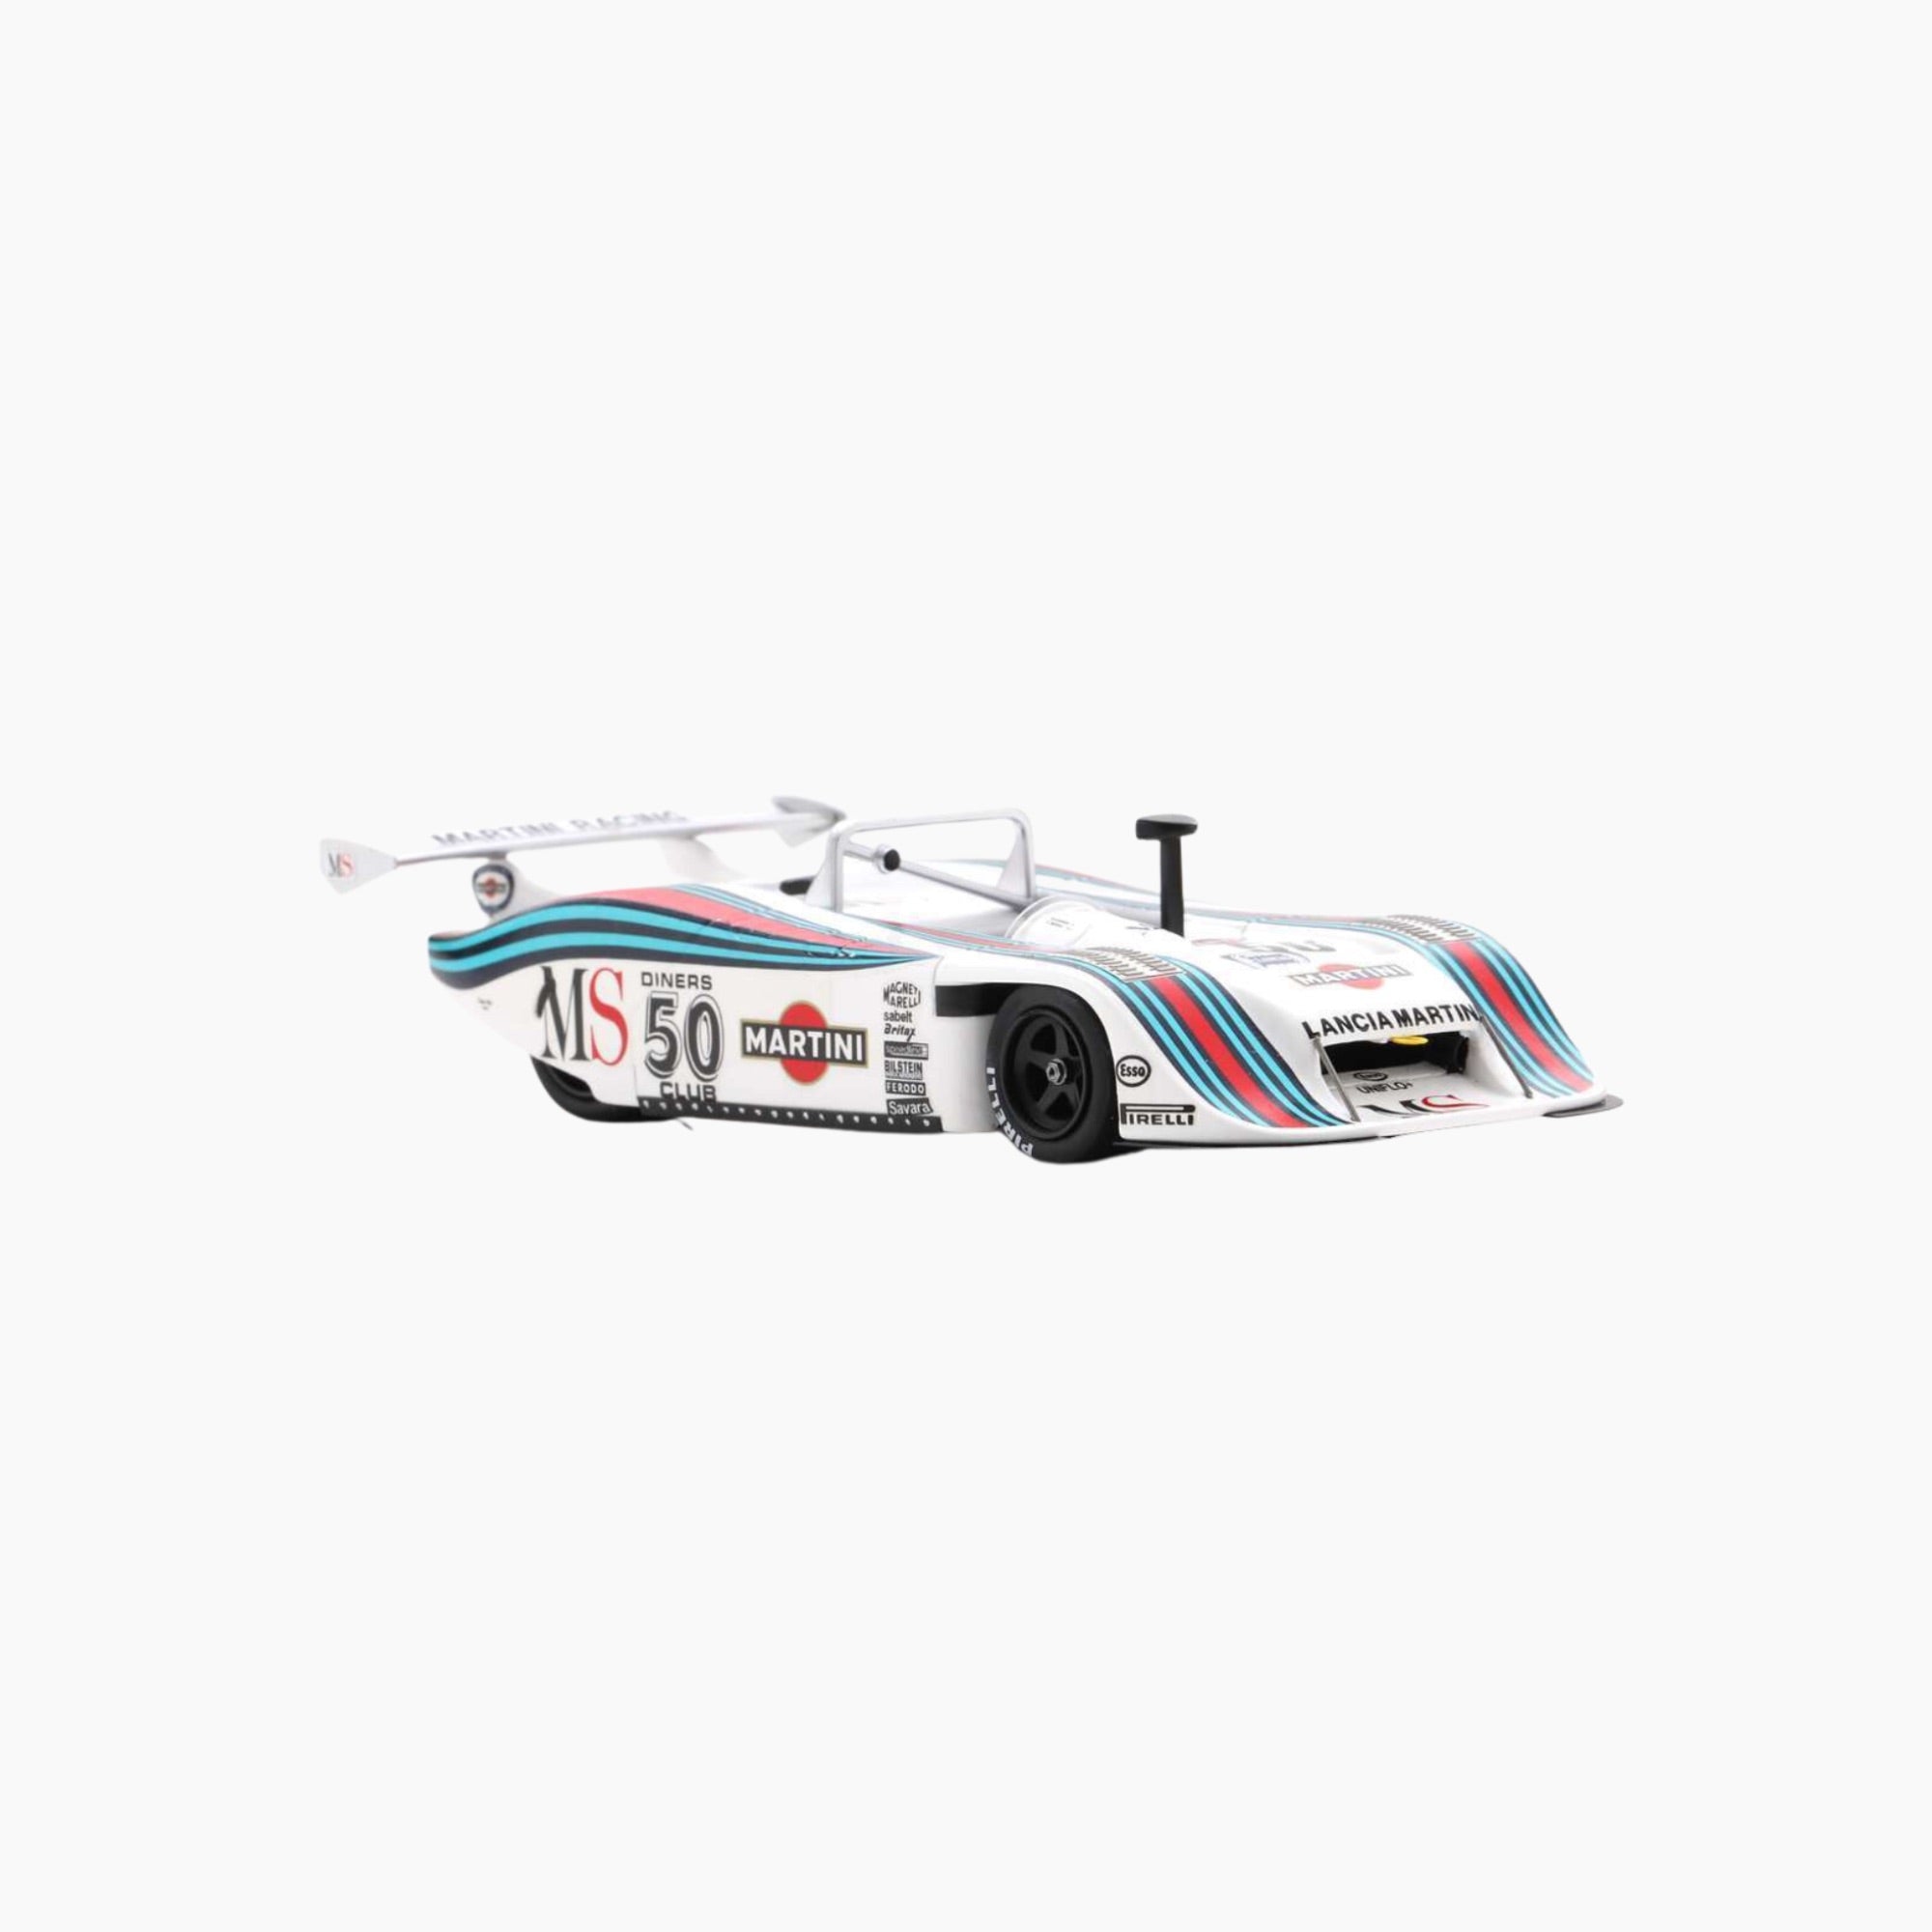 Lancia LC1 Winner 1000km Nurburgring 1982 | 1:43 Scale Model-1:43 Scale Model-Spark Models-gpx-store